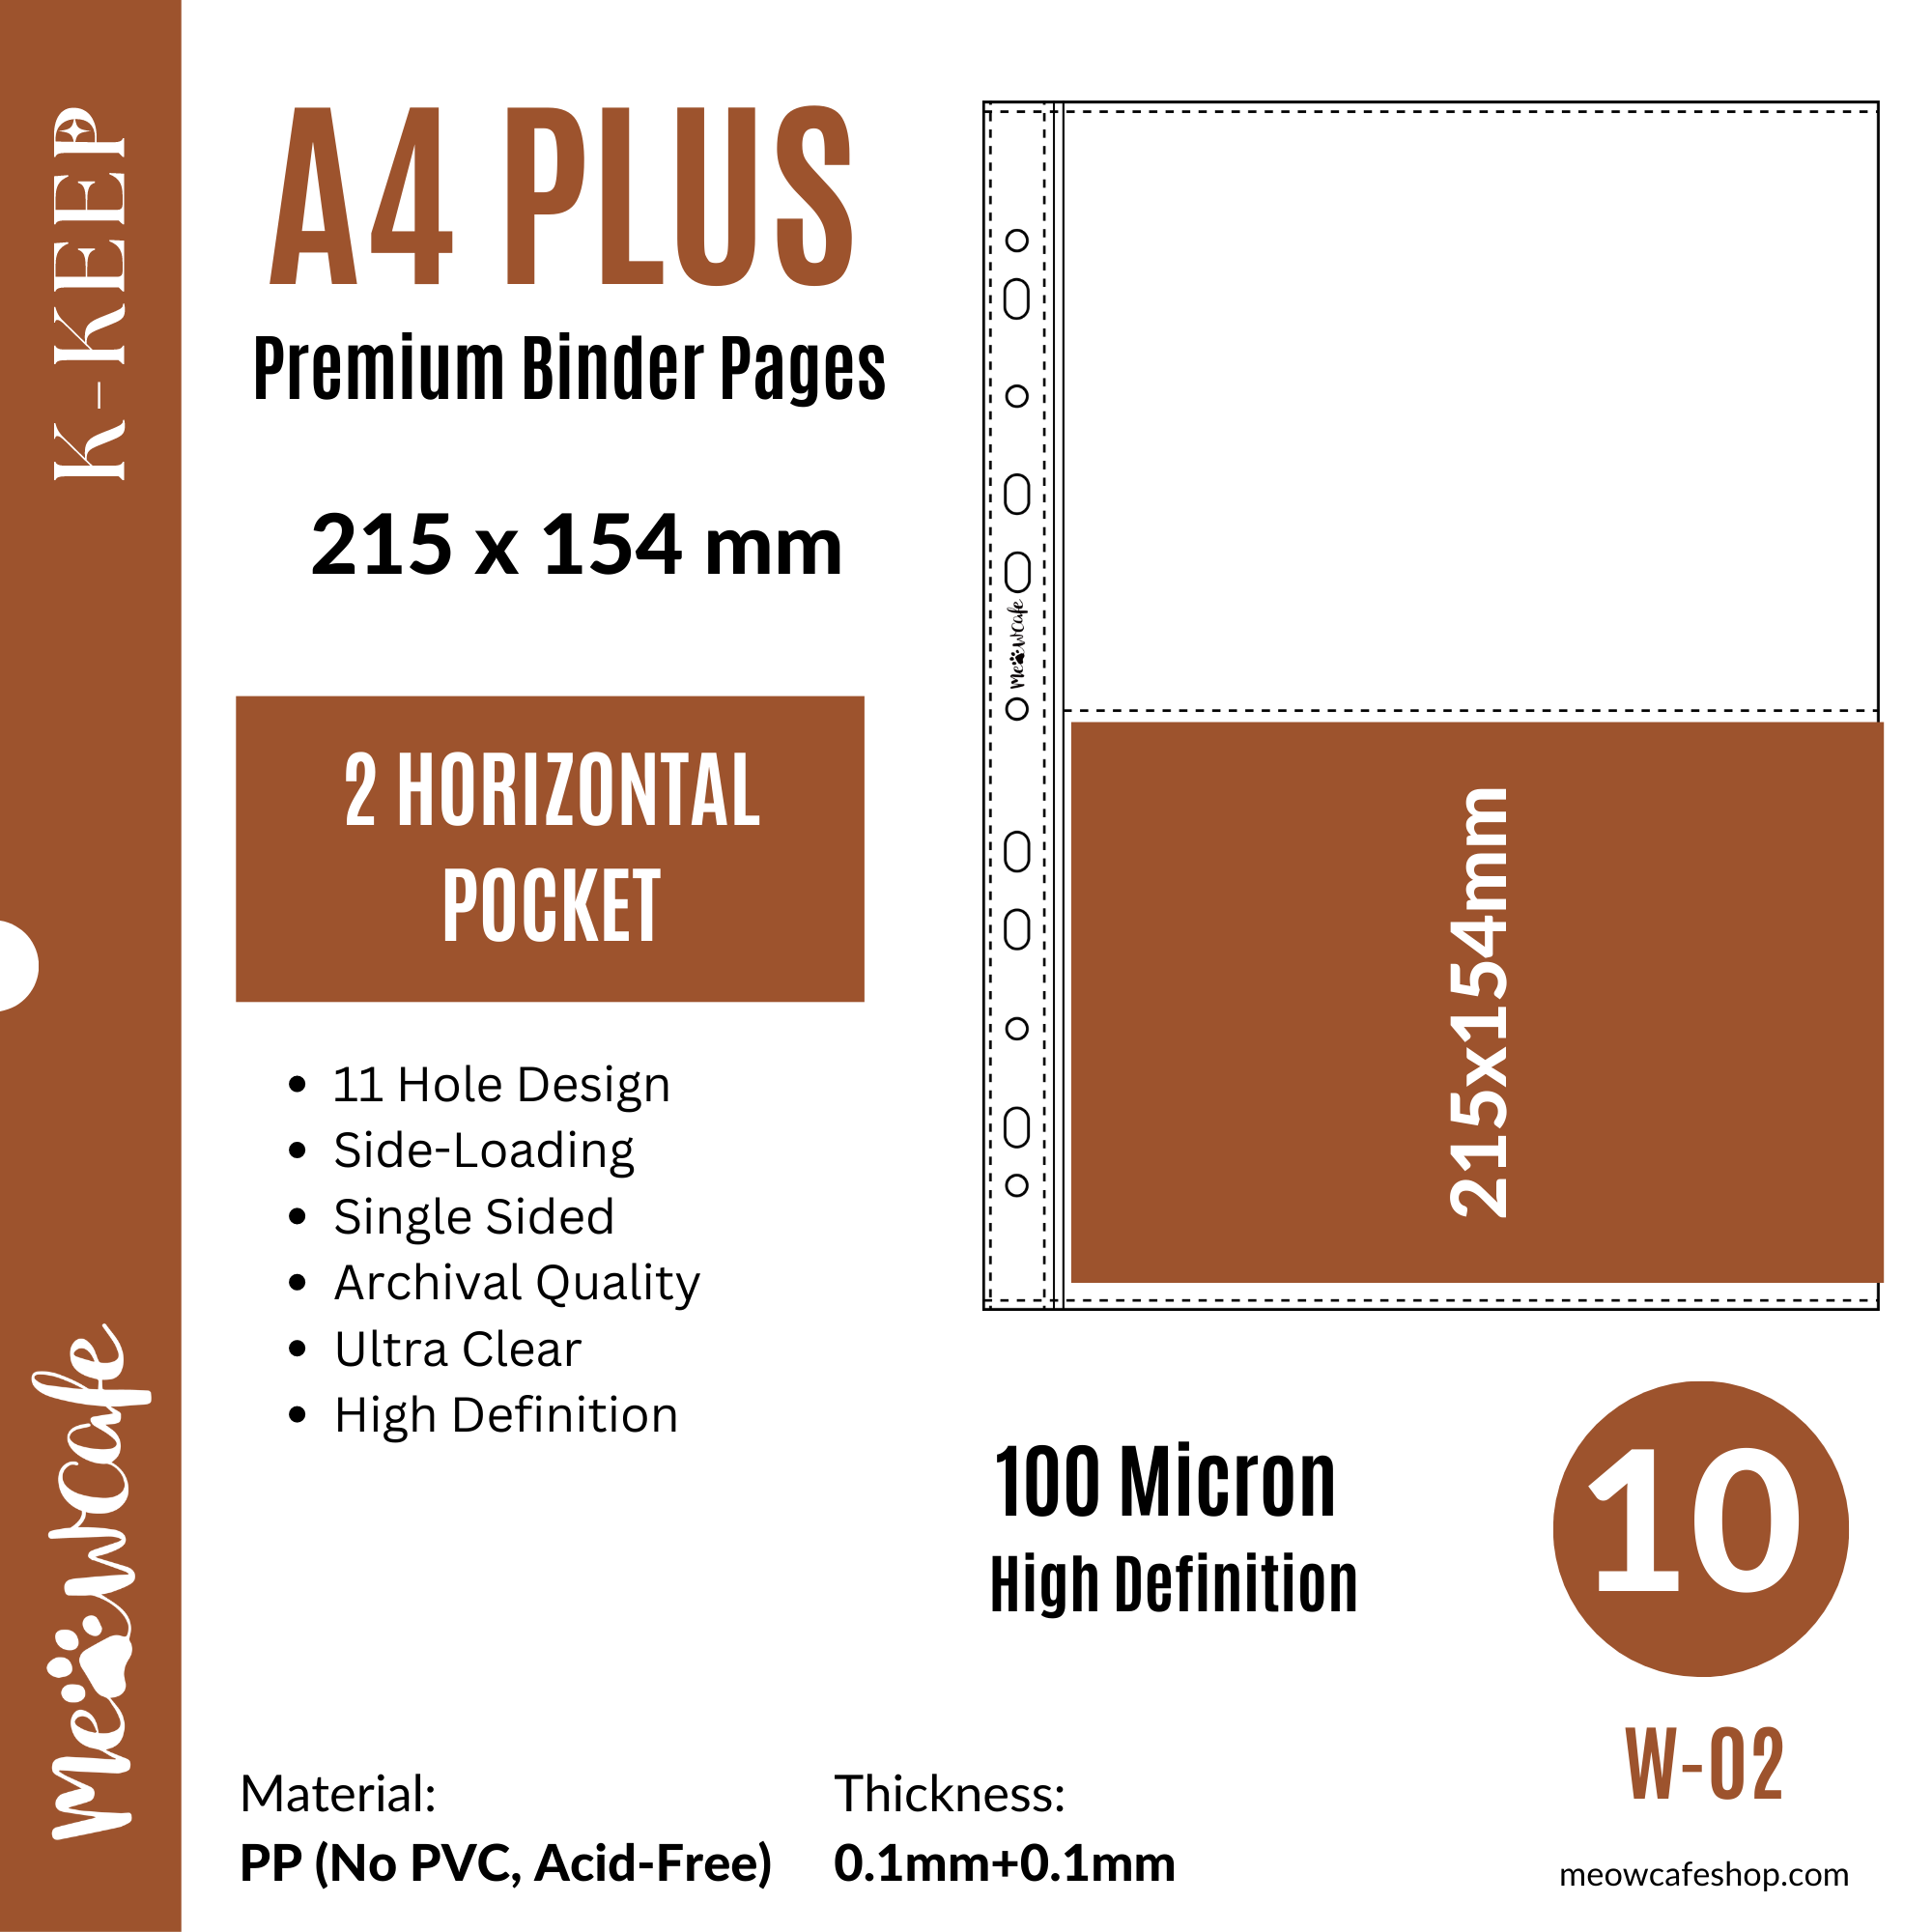 K-KEEP [A4 PLUS] - 2 Horizontal Pocket - 11 Holes Premium Binder Pages, 100 Micron Thick, High Definition (Pack of 10) - (W-02)